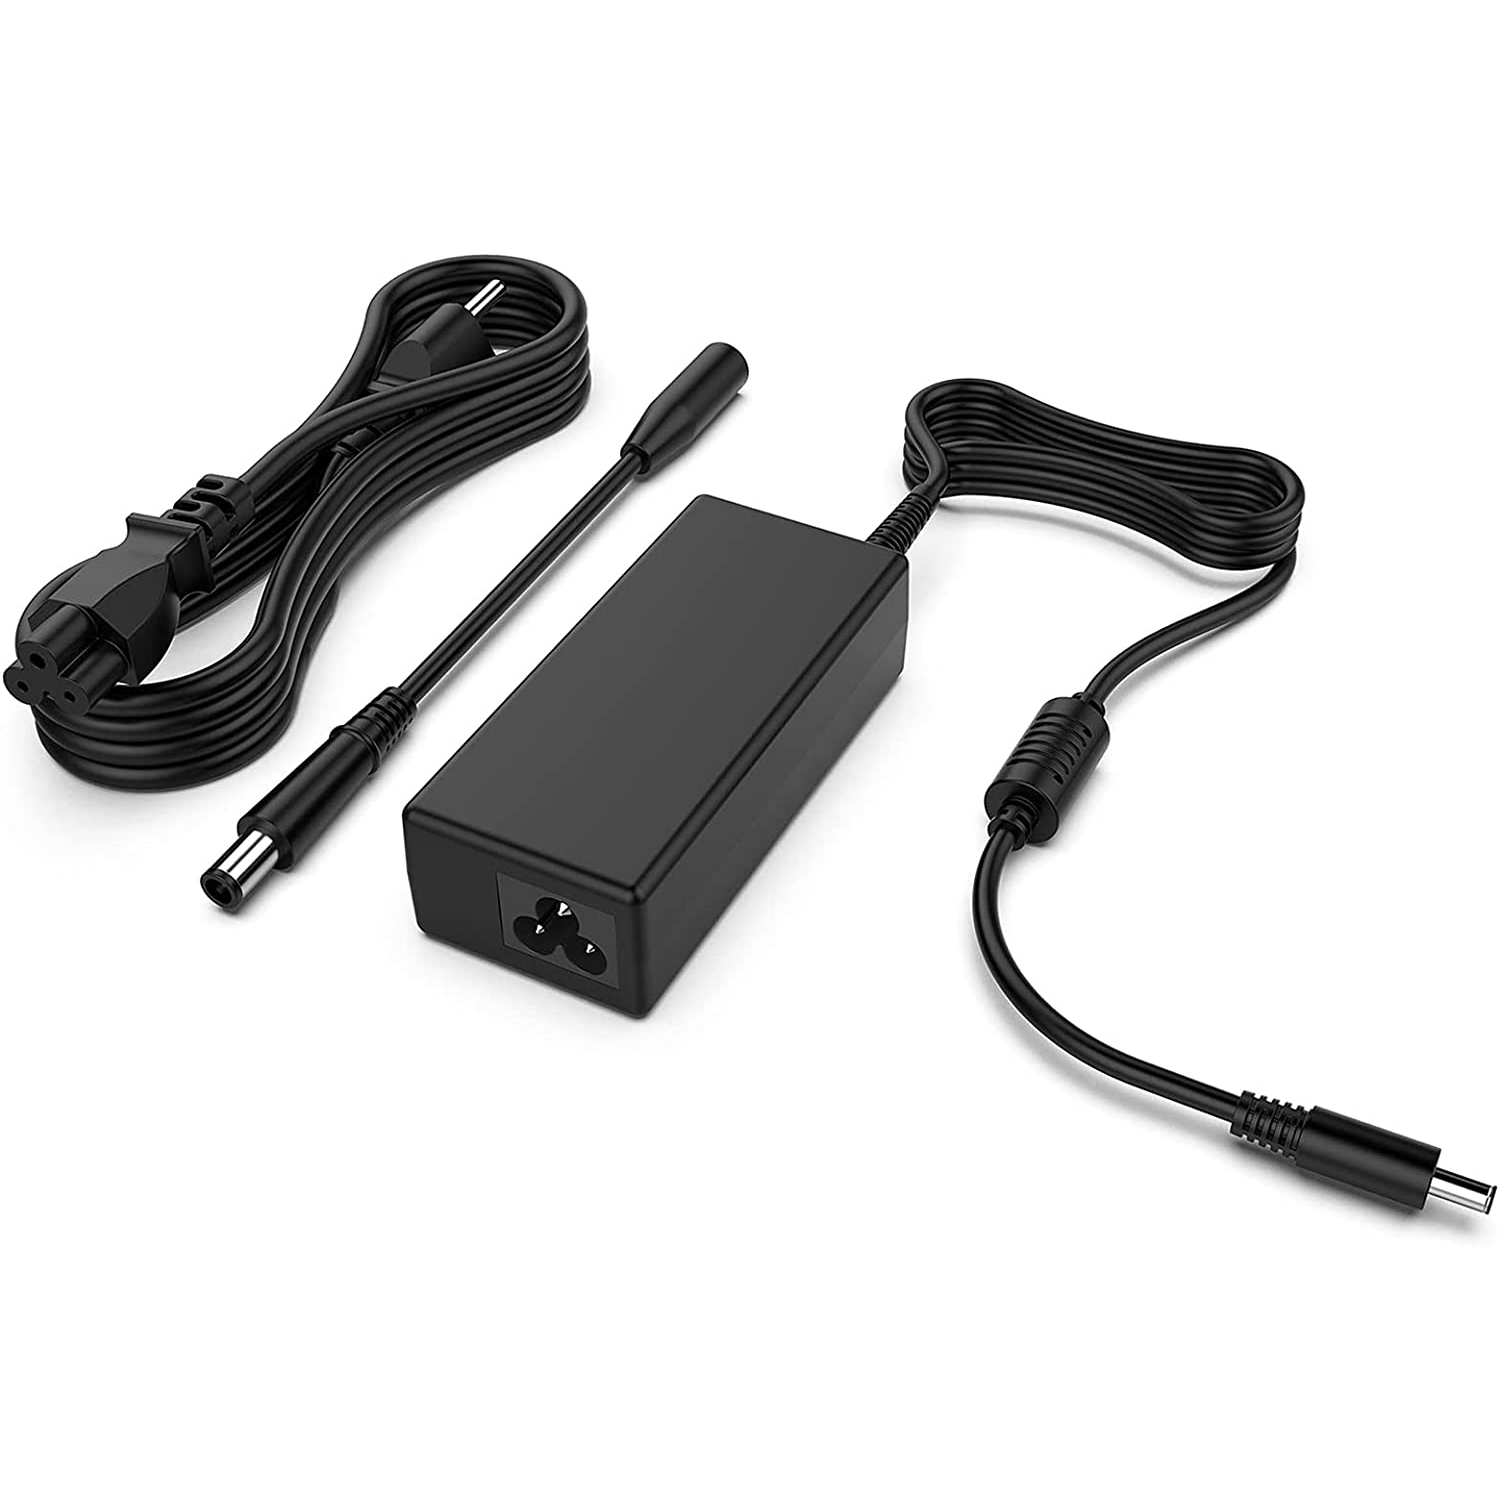 65W Laptop Charger for Dell-Inspiron 17-5000 15-7000 15-5000 15-3000 14-5000 14-3000 13-7000 13-5000 11-3000 Series XPS 13 14 15 Latitude E5470 E7470 7480 Series 45W AC Adapter Po